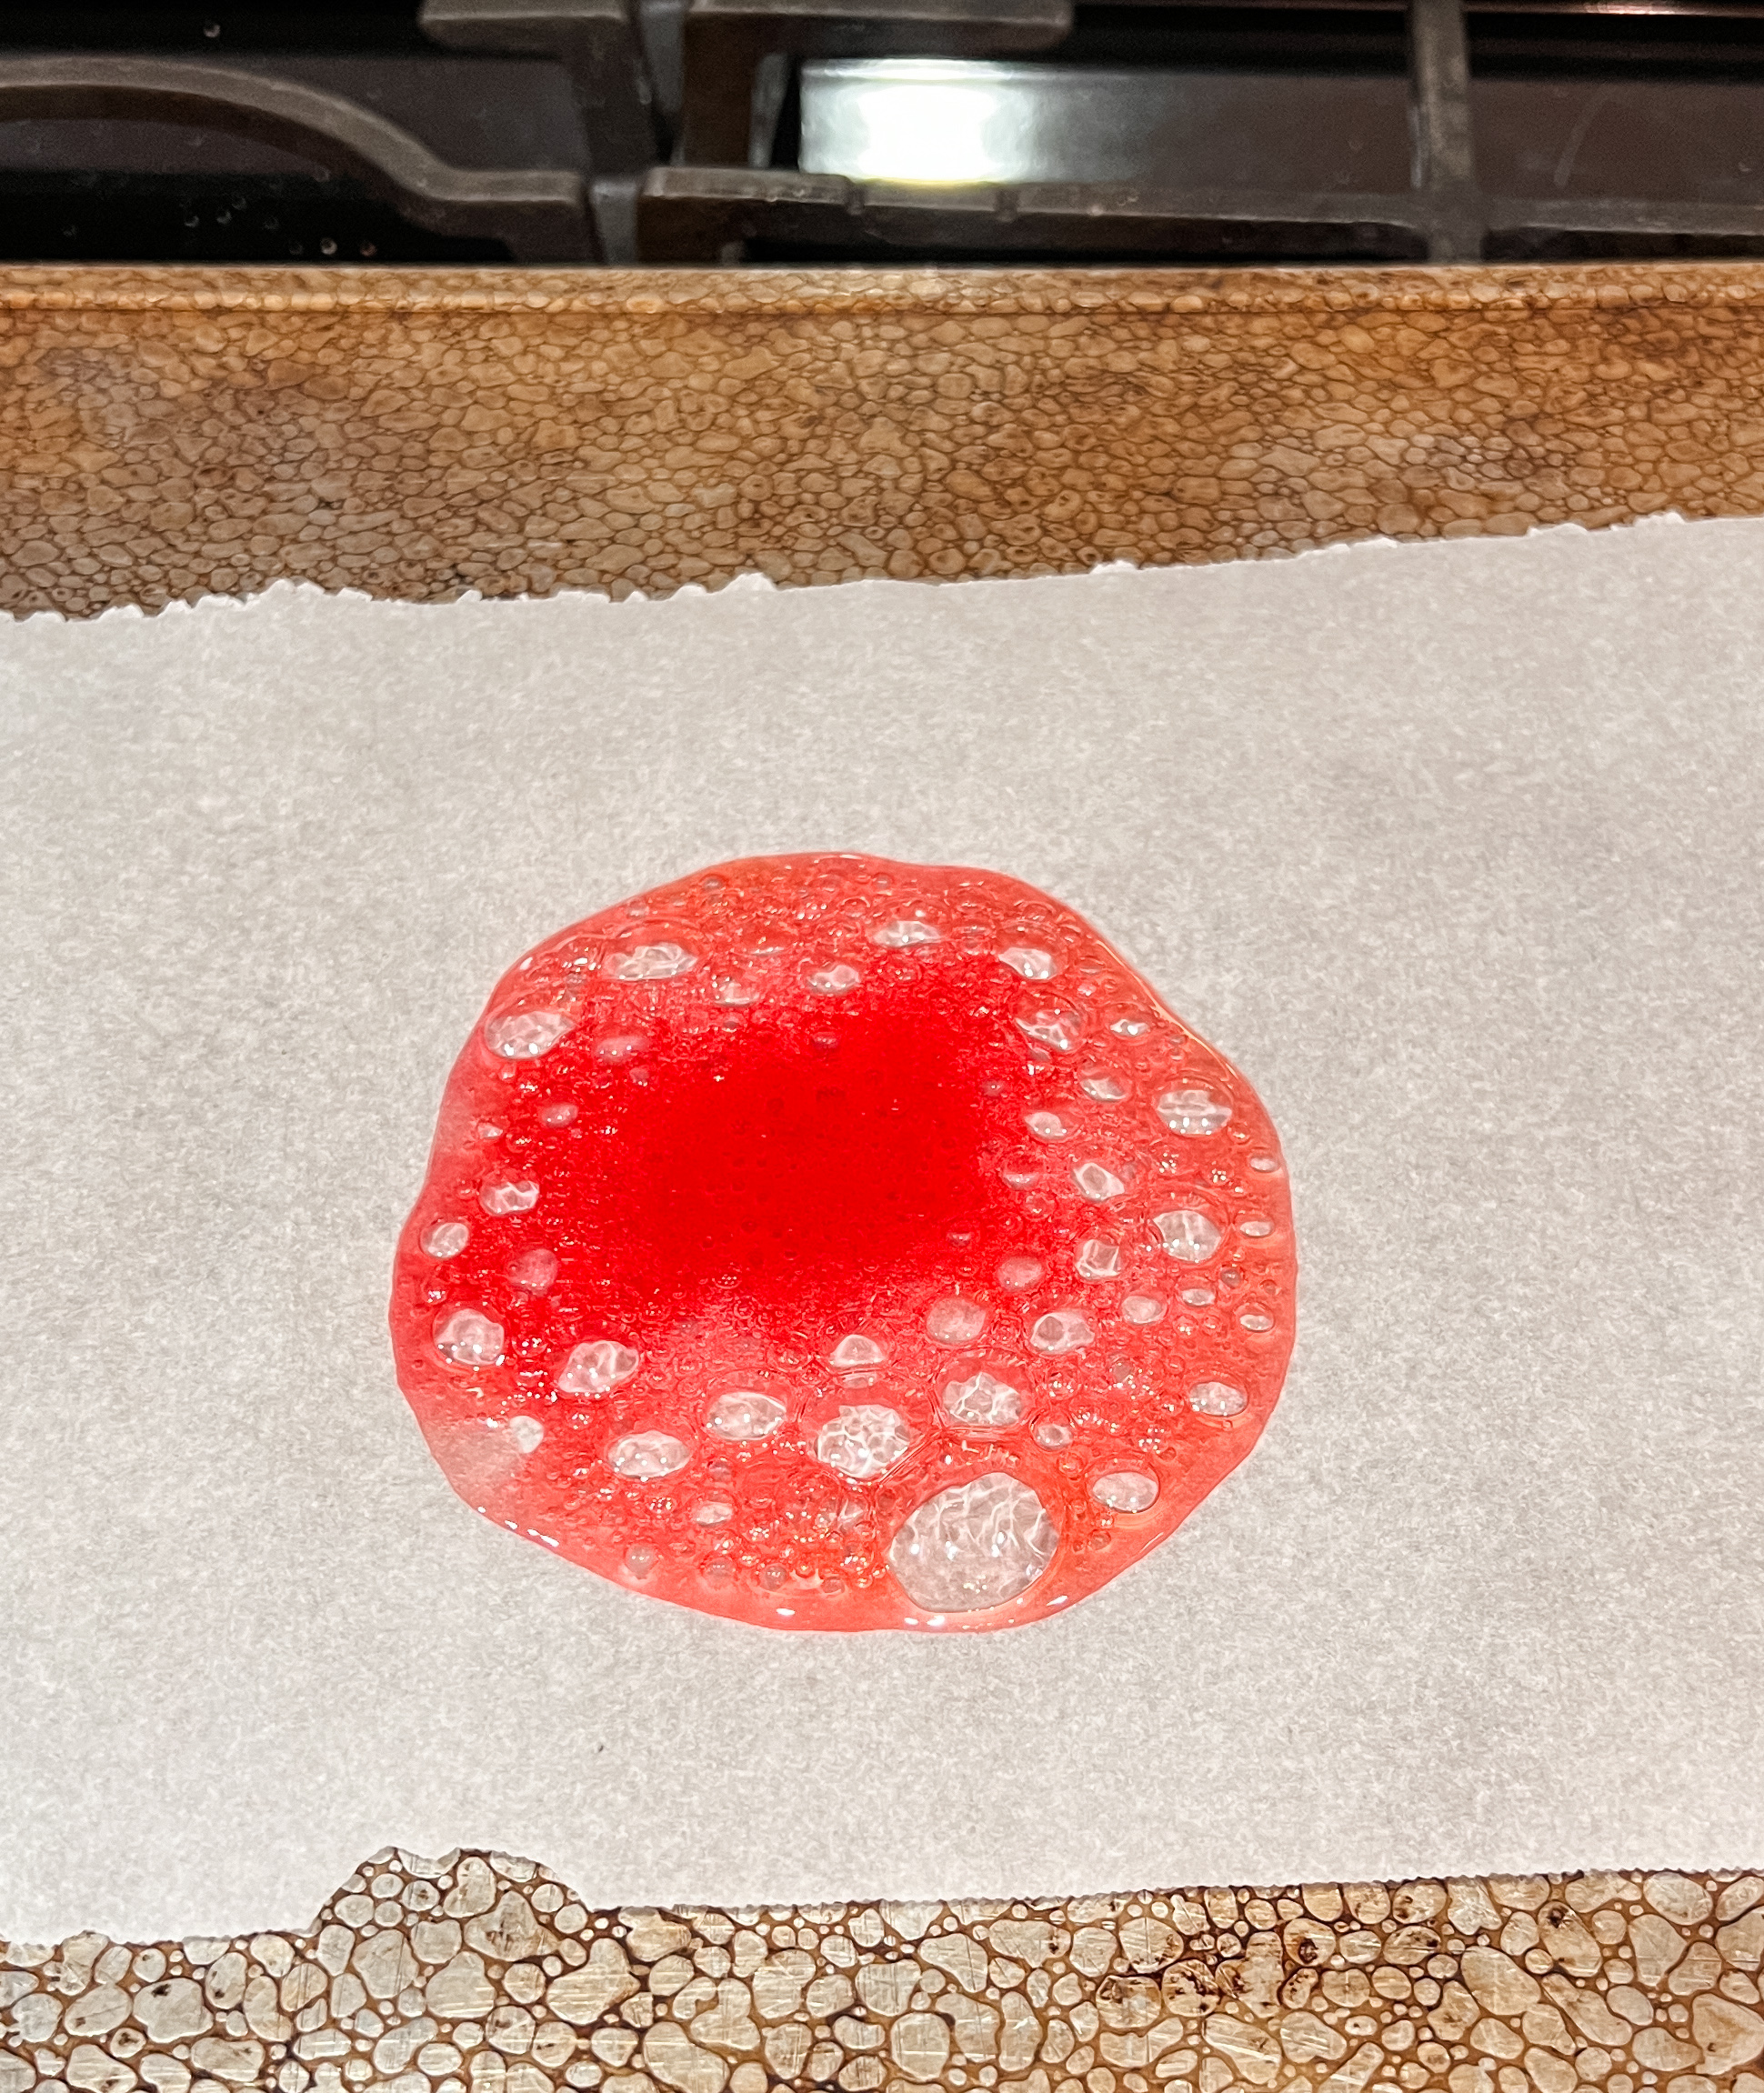 A piece of melted red candy with bubbles in it on parchment paper.